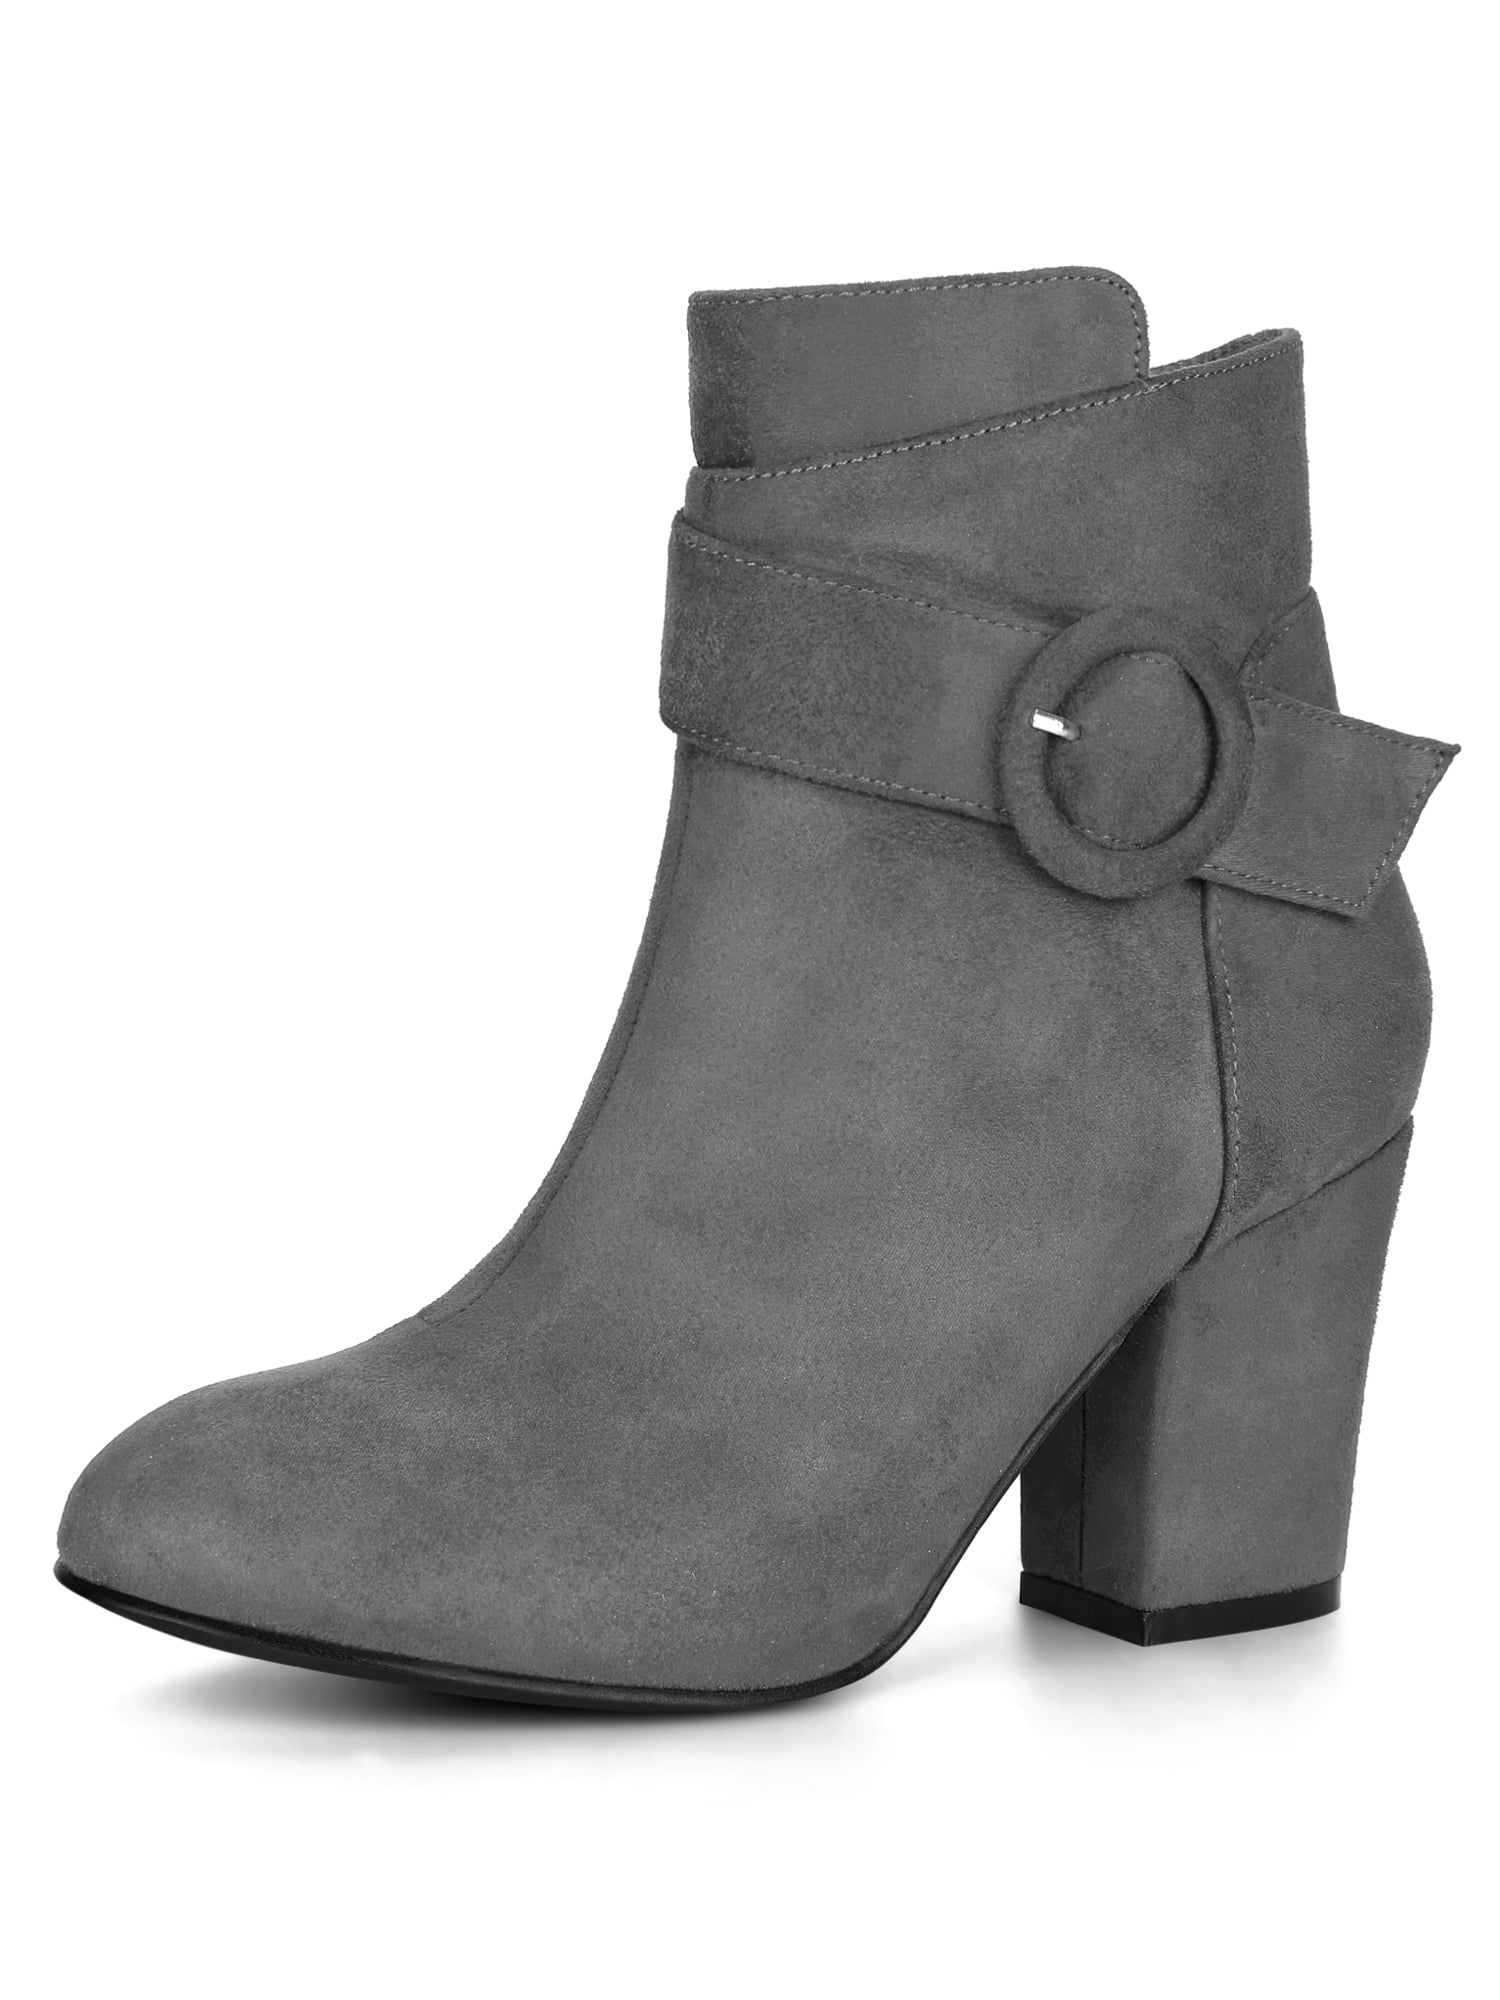 Unique Bargains - Women's Chunky Heel Buckle Strap Ankle Boots Gray ...